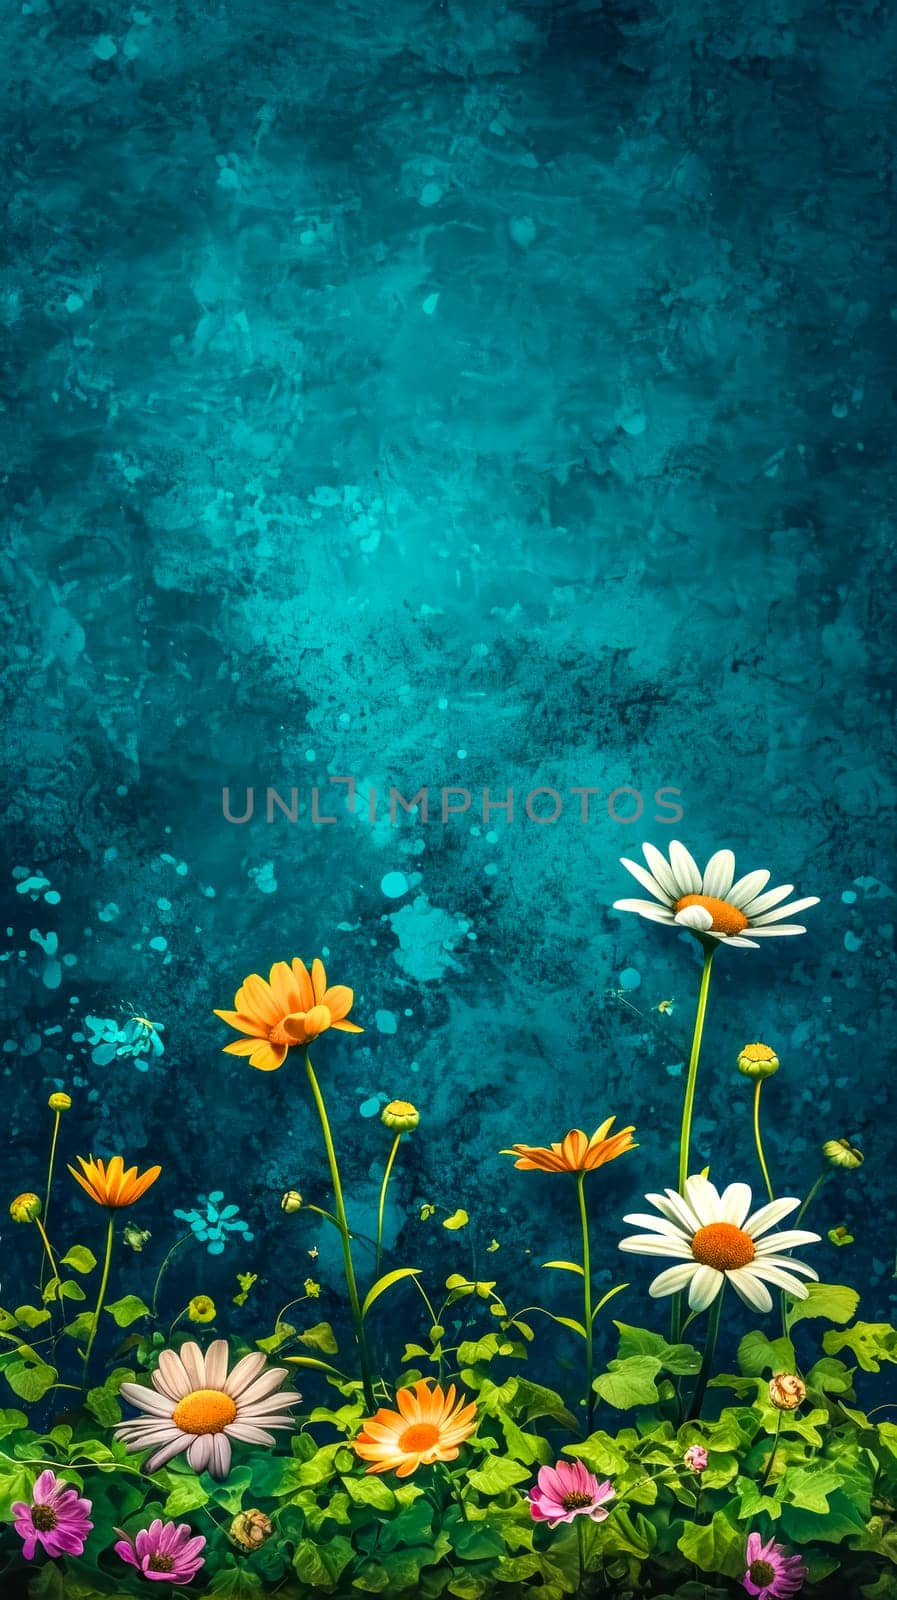 artistic depiction of spring with a textured teal background and a variety of blooming flowers in the foreground by Edophoto